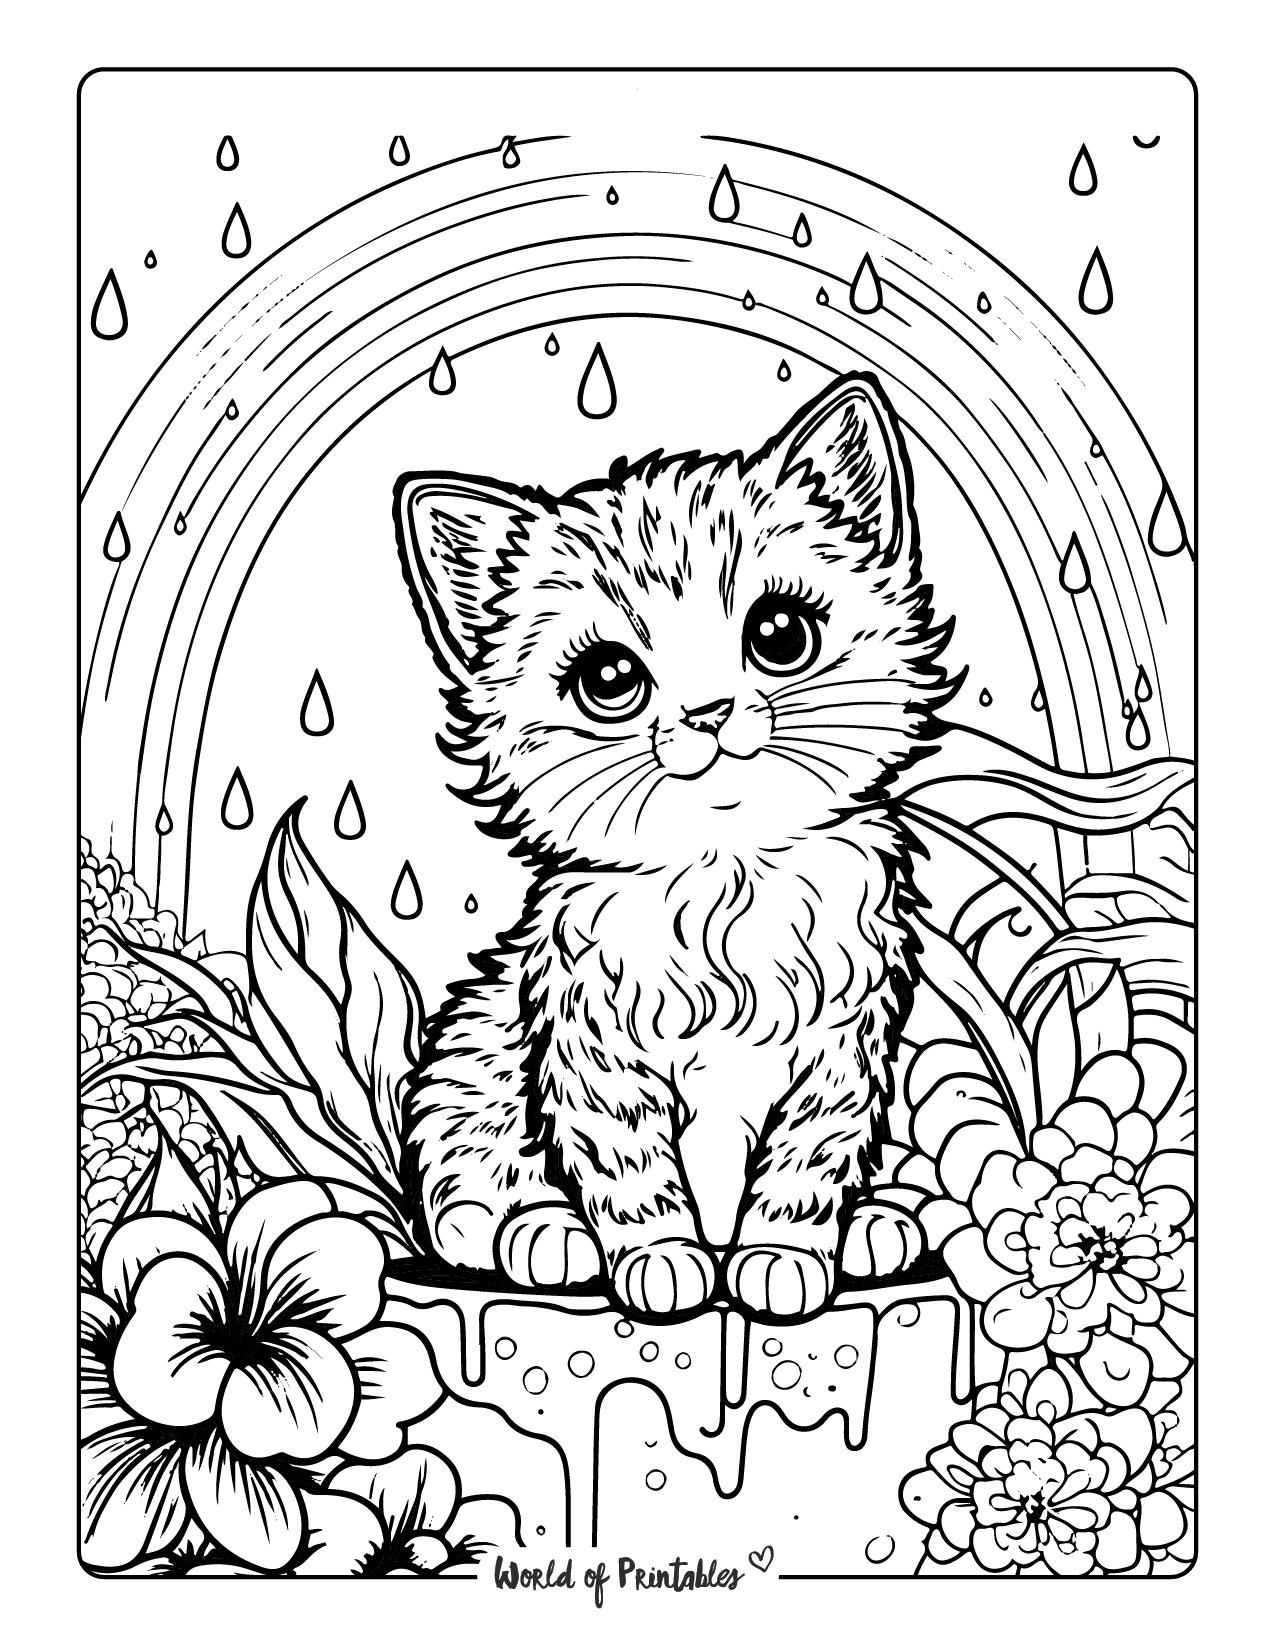 Cat coloring pages for adults cat coloring page coloring pages stitch coloring pages